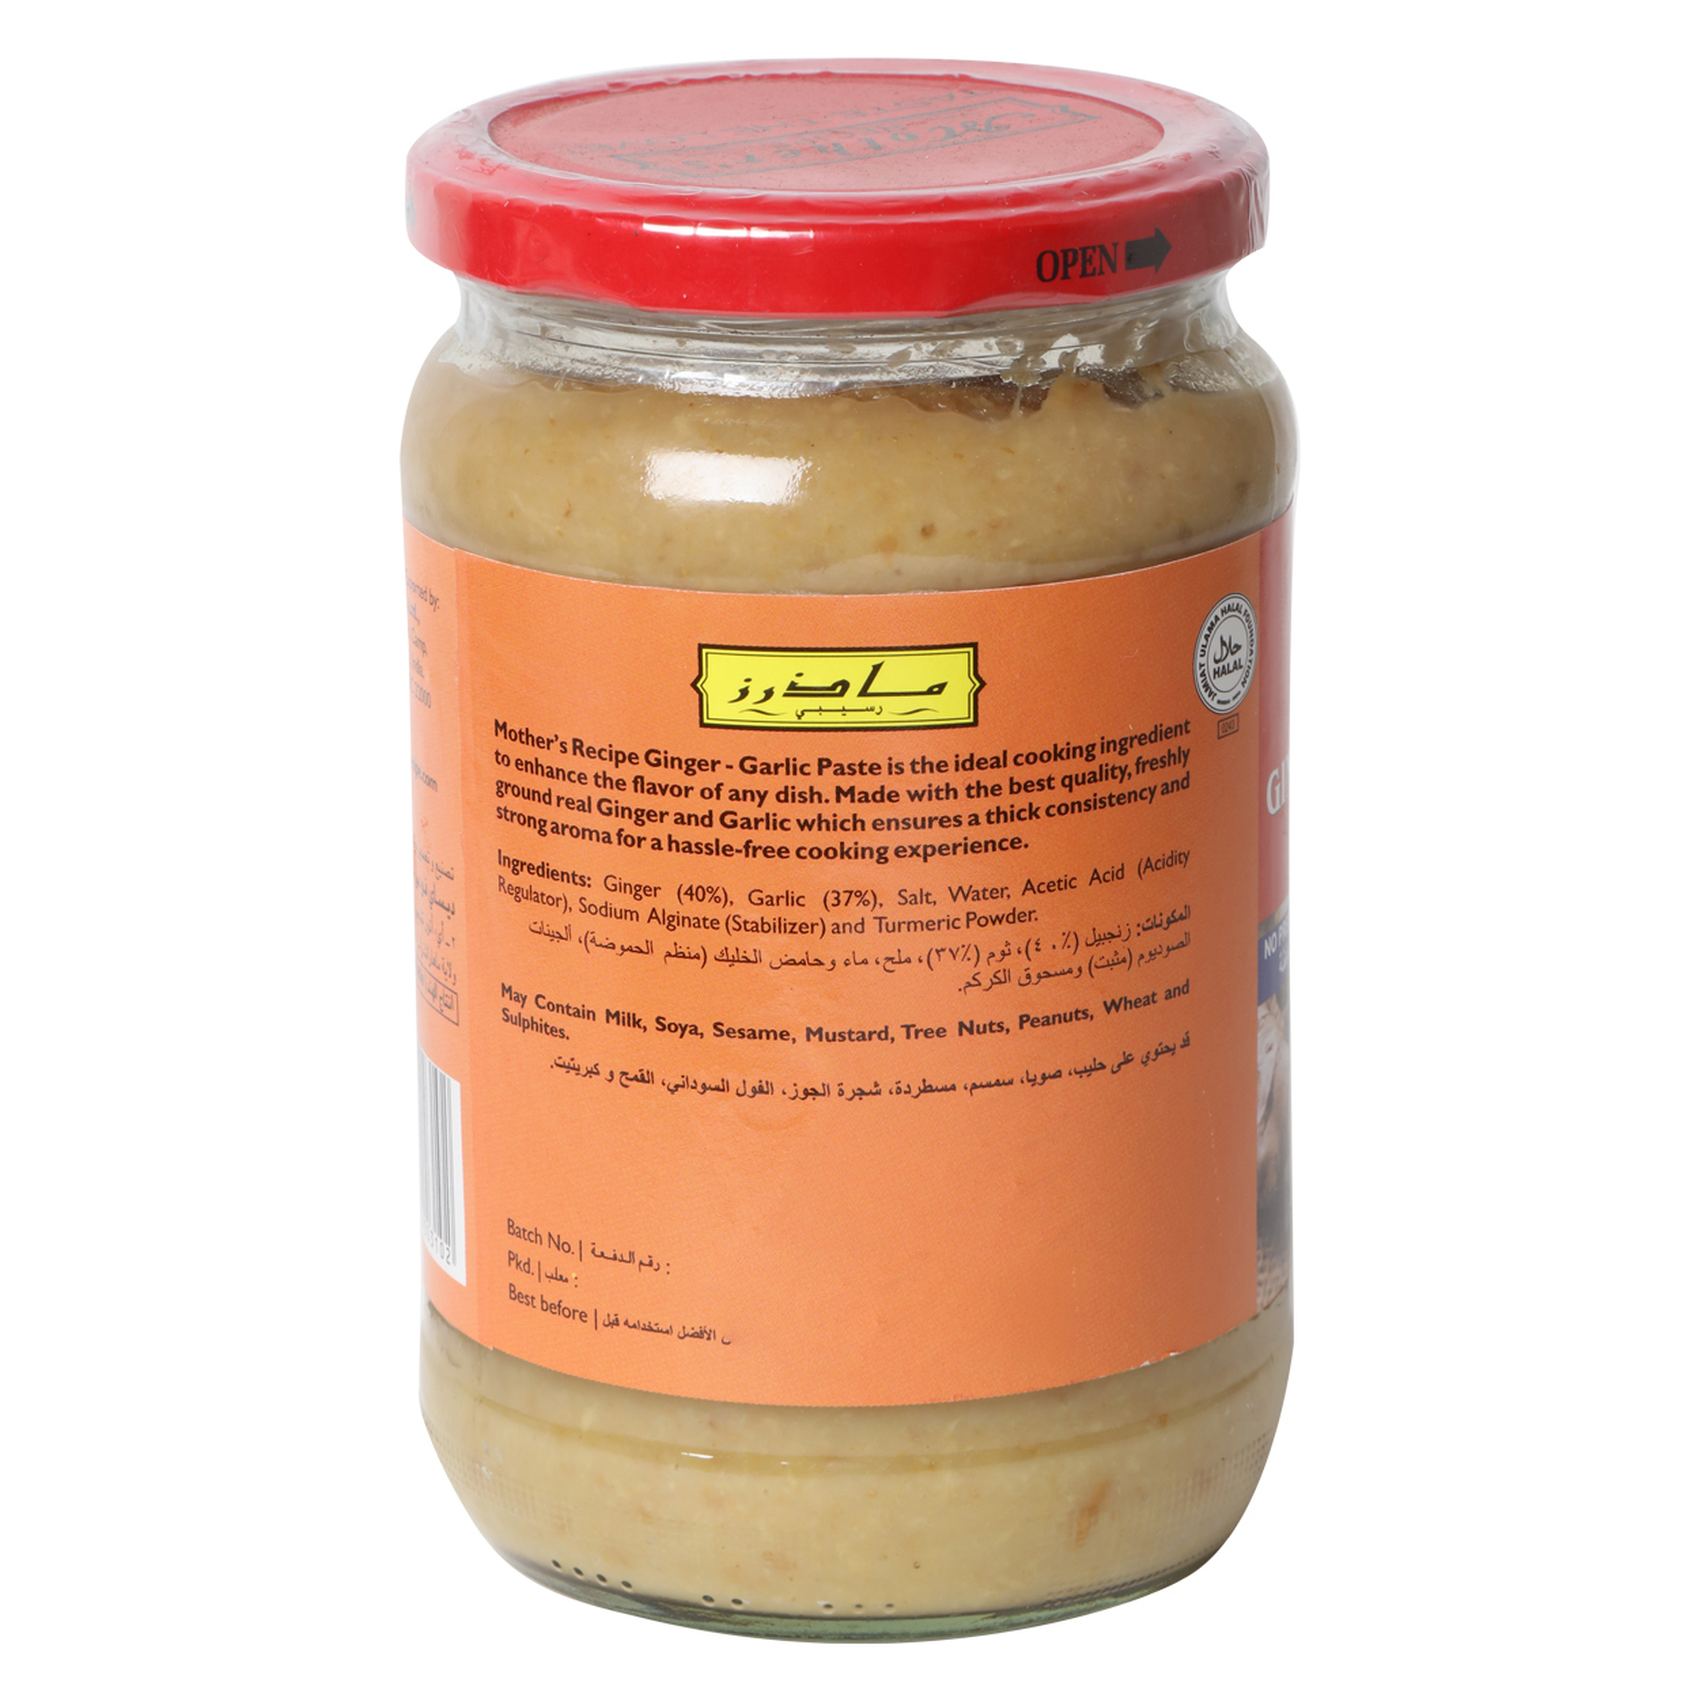 Mothers Recipe Ginger And Garlic Paste 700g